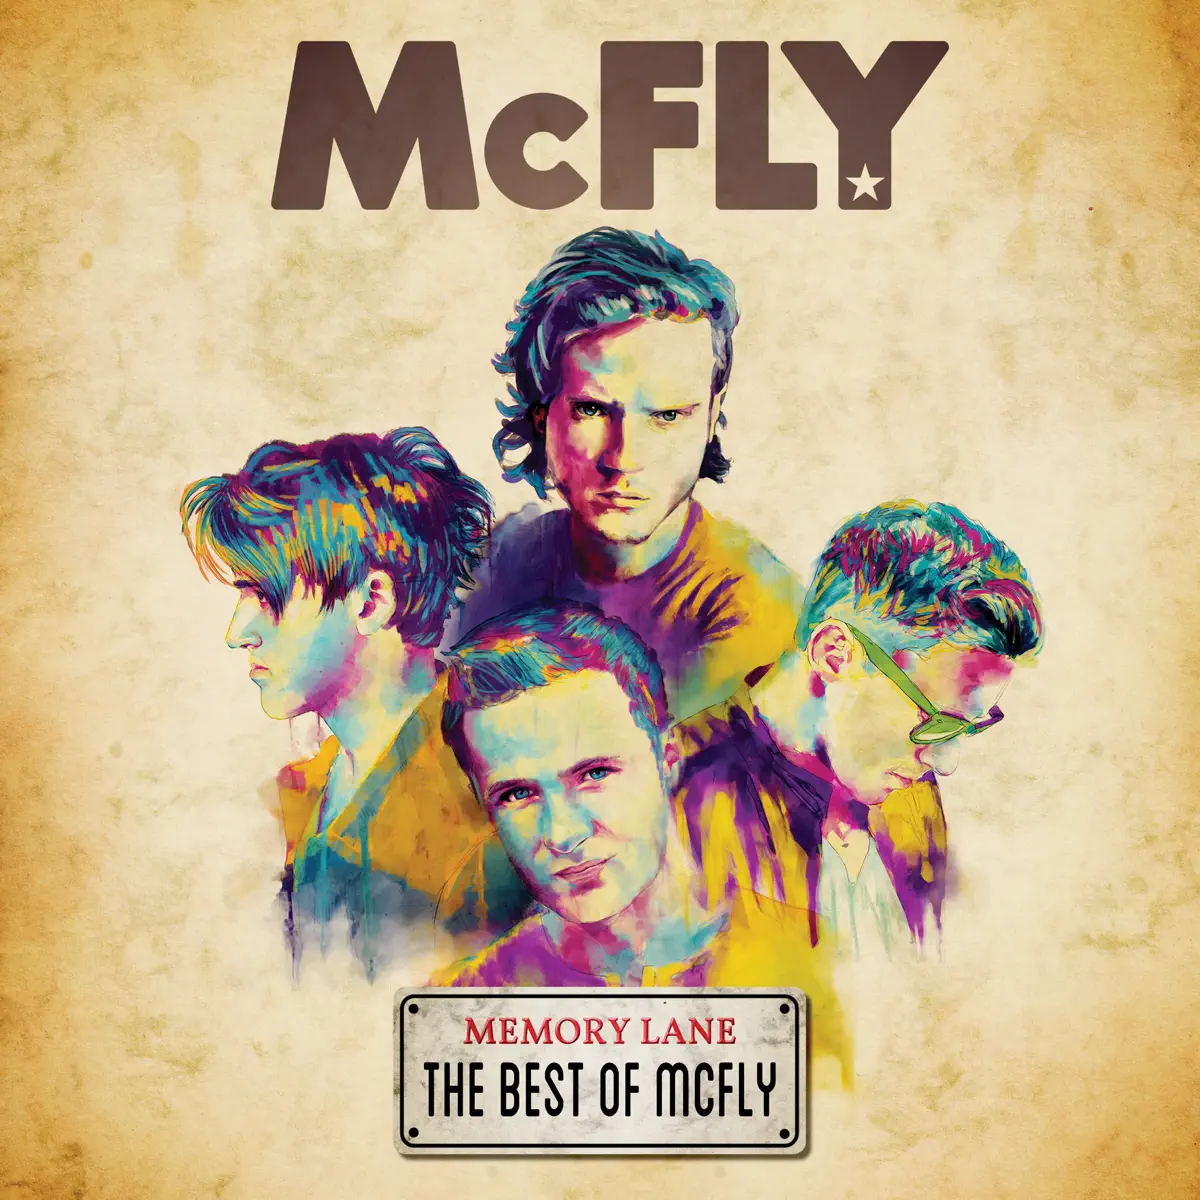 McFly - Memory Lane  (The Best Of McFly) (2012) [iTunes Plus AAC M4A + M4V – Full HD]-新房子